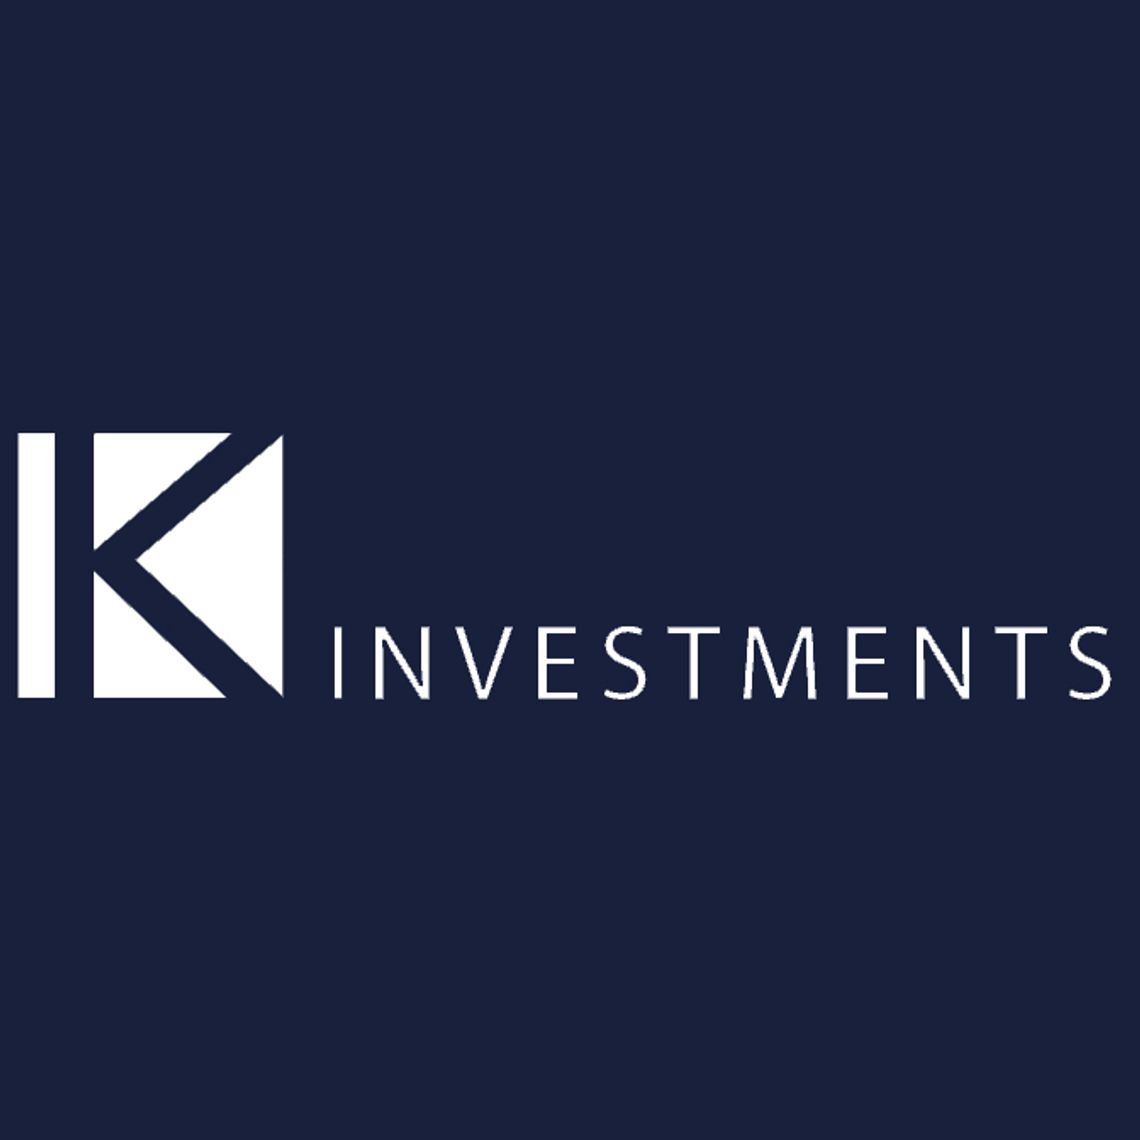 K Investments